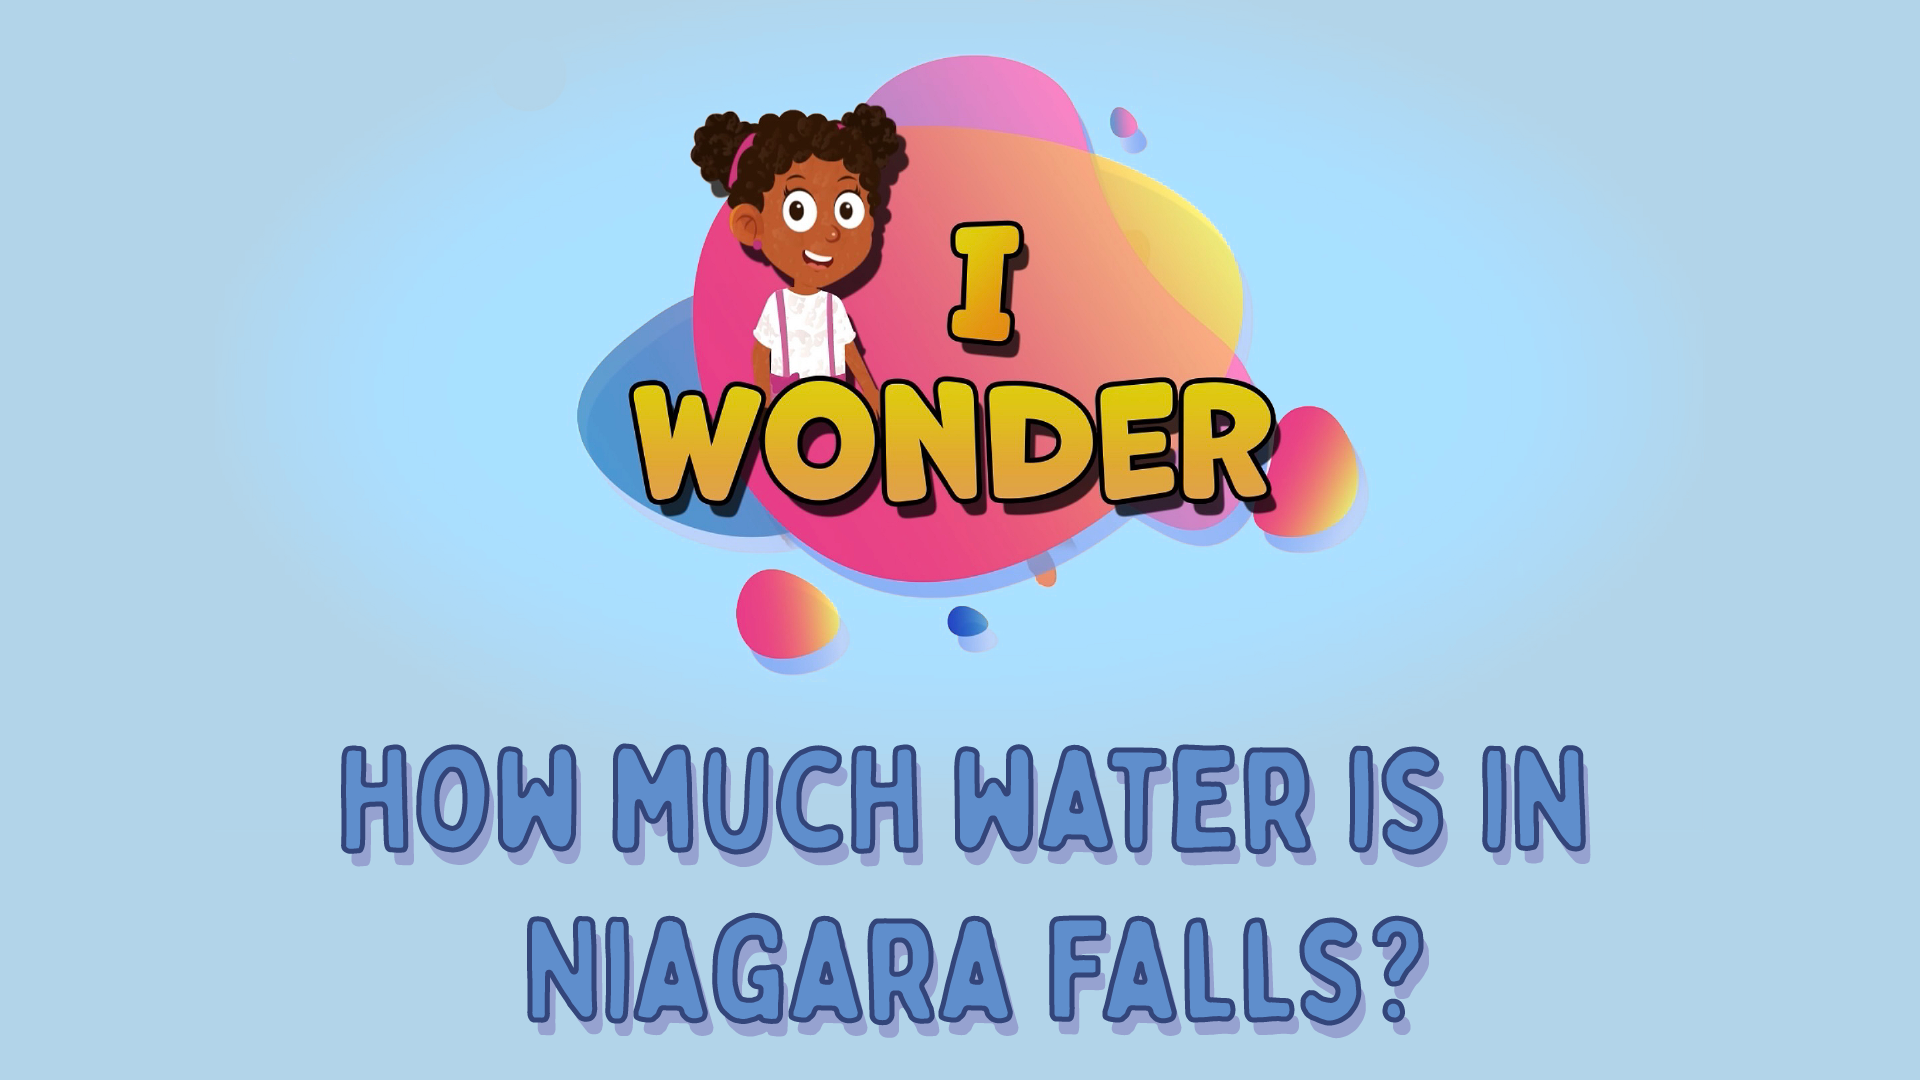 How Much Water Is In Niagara Falls?